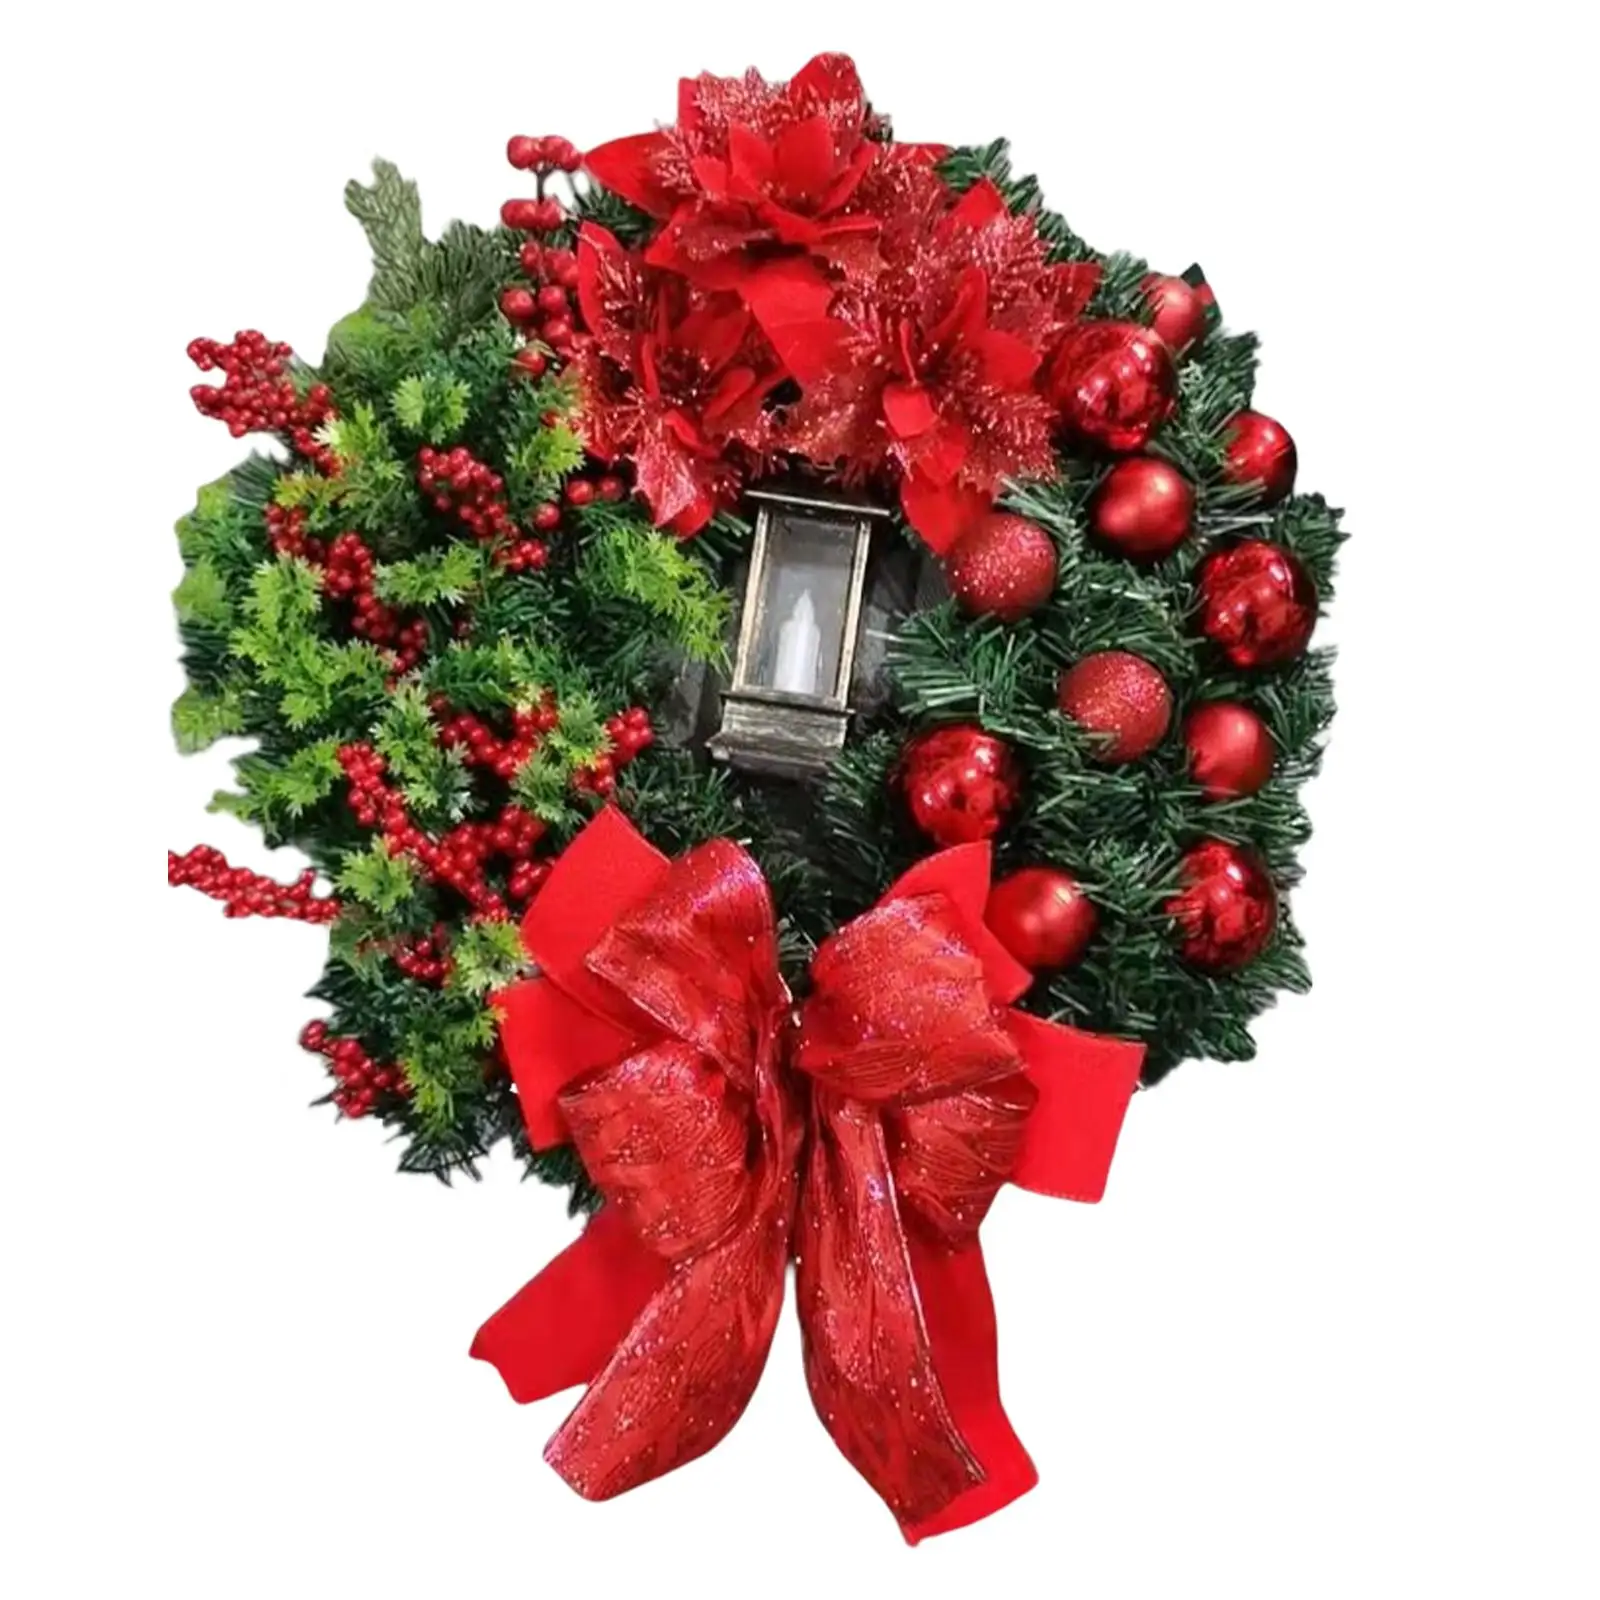 40Cmx40cm Hanging Christmas Garland with Oil Lamp Tabletop Centerpieces Xmas Wreath for Home Holiday Mantel Winter Decorations